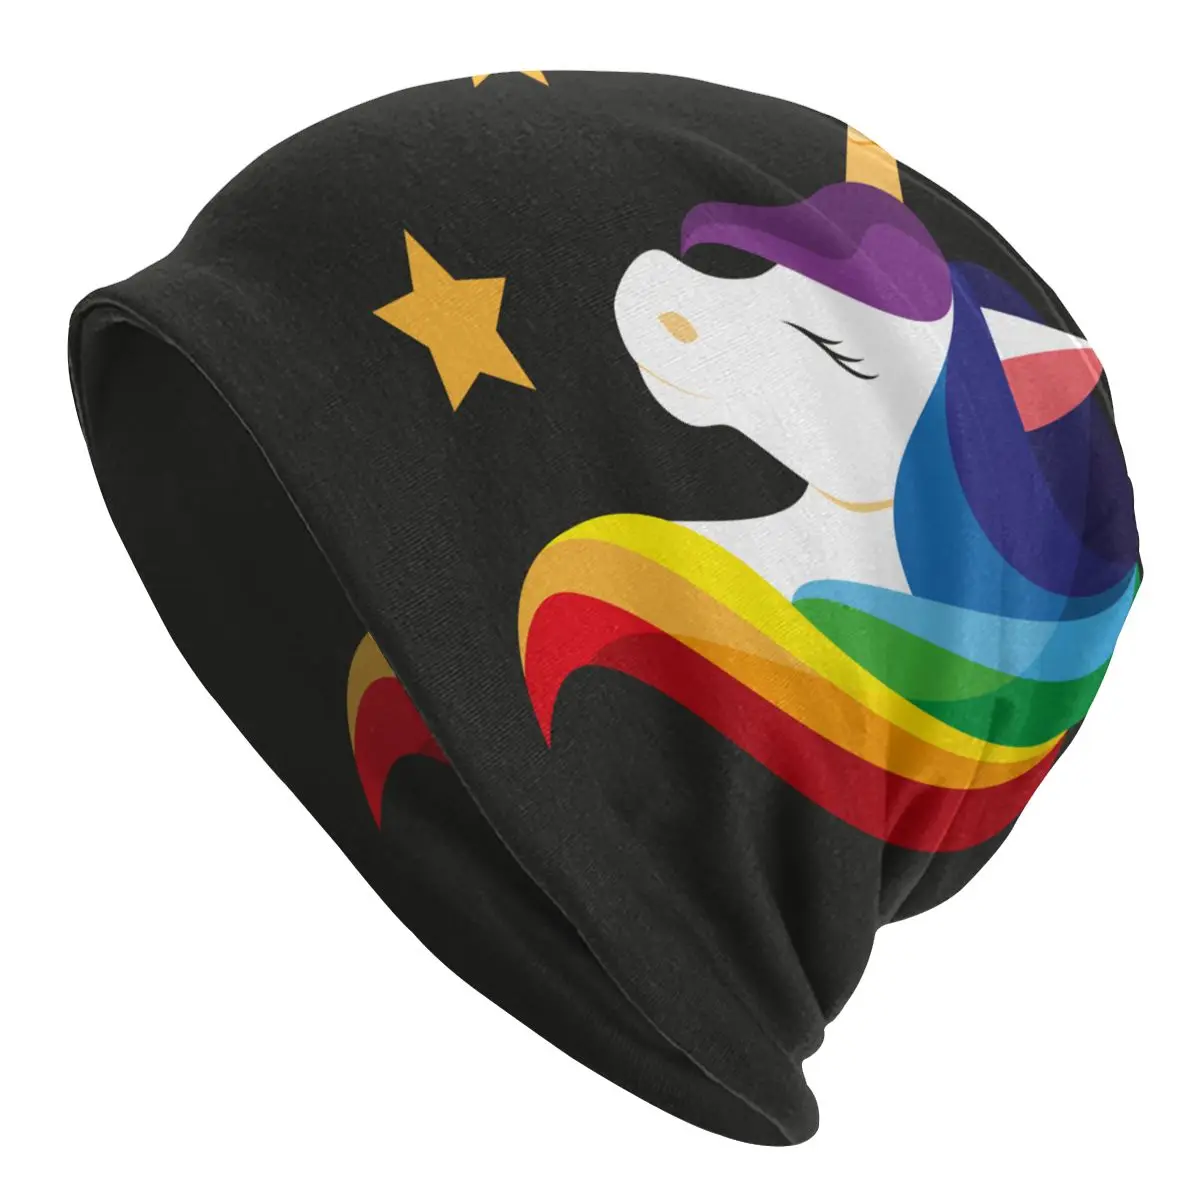 2022 Warm Hat for Women Rainbow Unicorn With Closed Eyes Stacking Knitted Bonnet Cap Men Hat Hip Hop Beanies